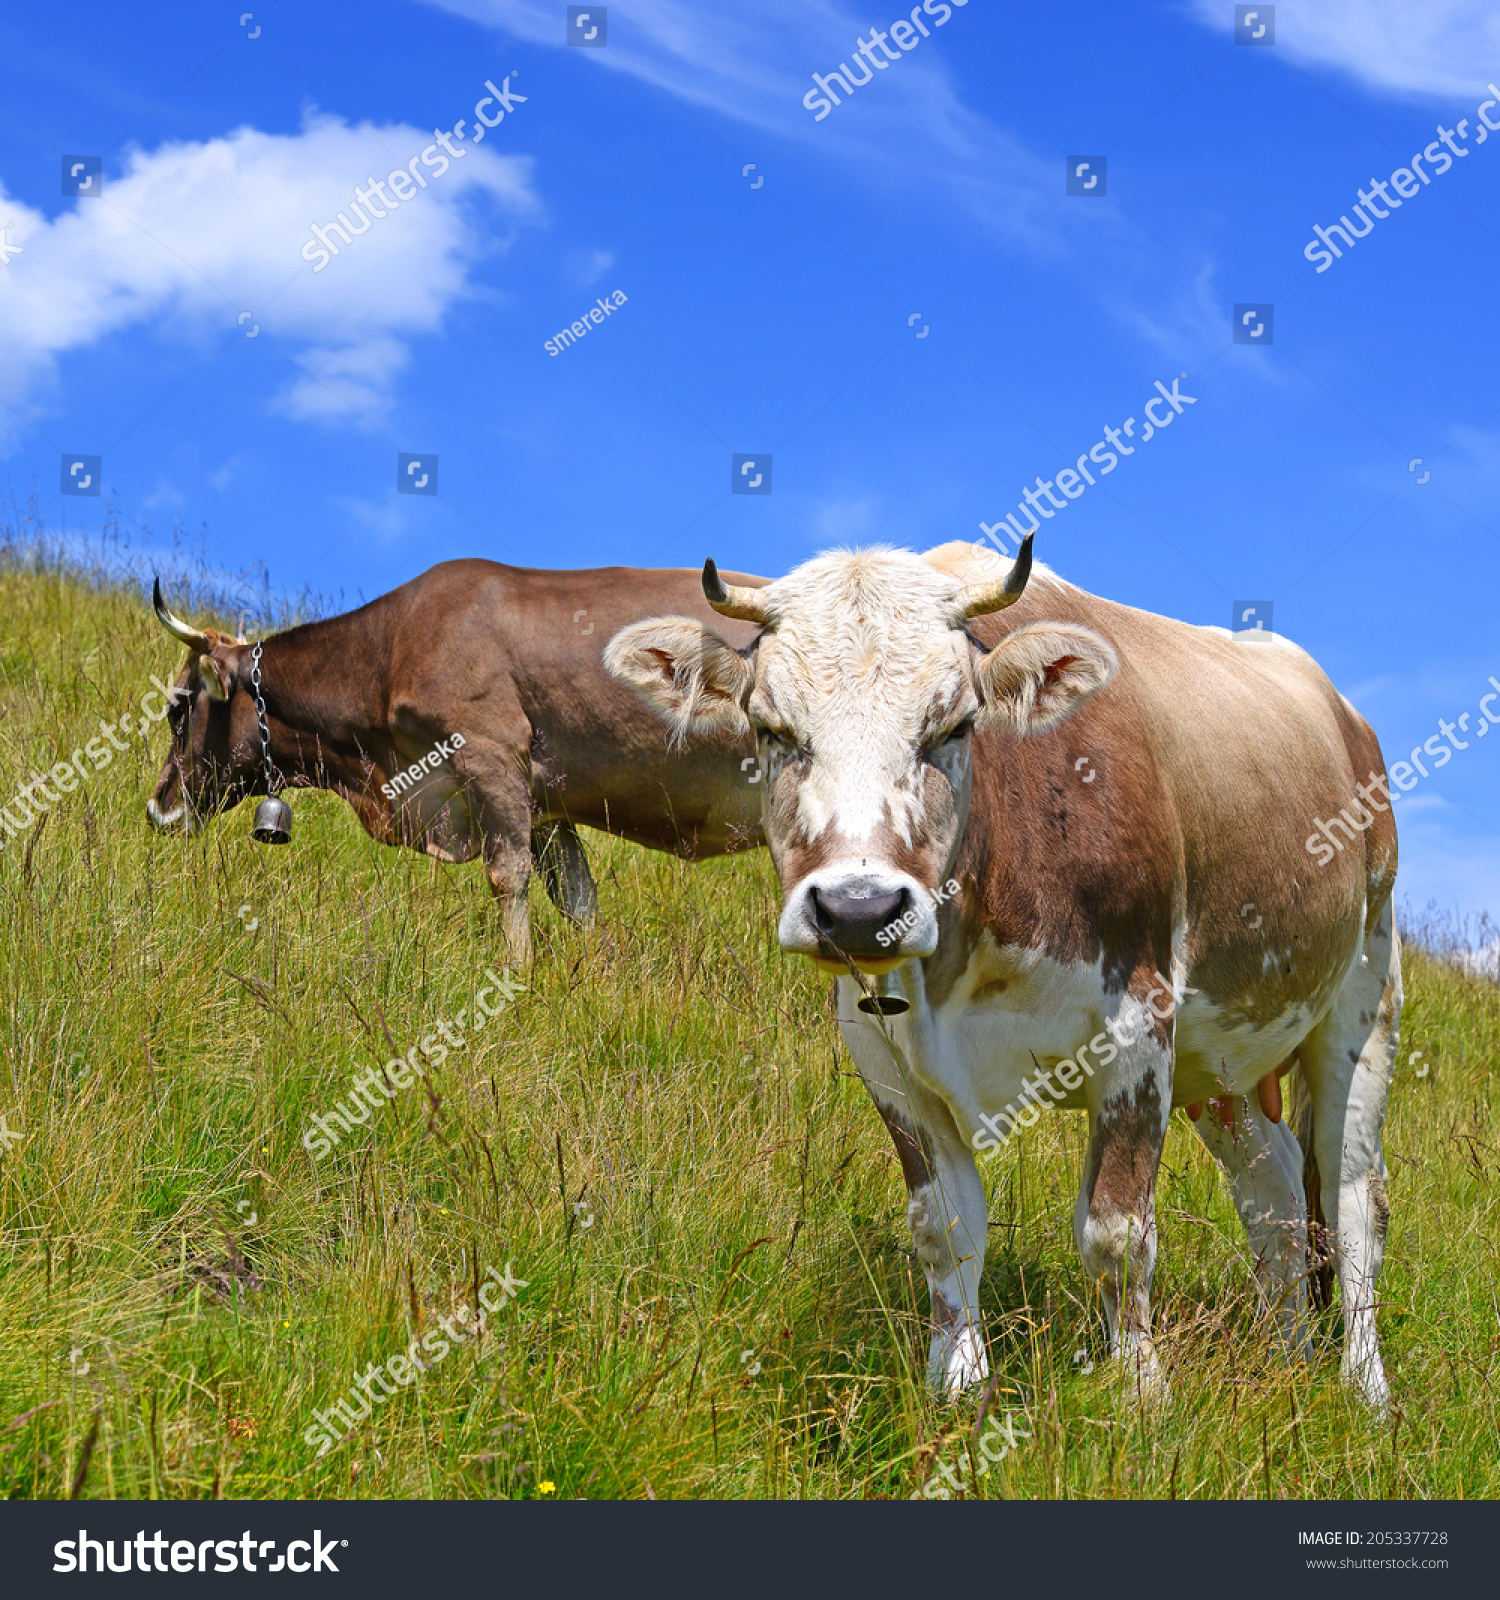 Cows on a summer pasture #205337728